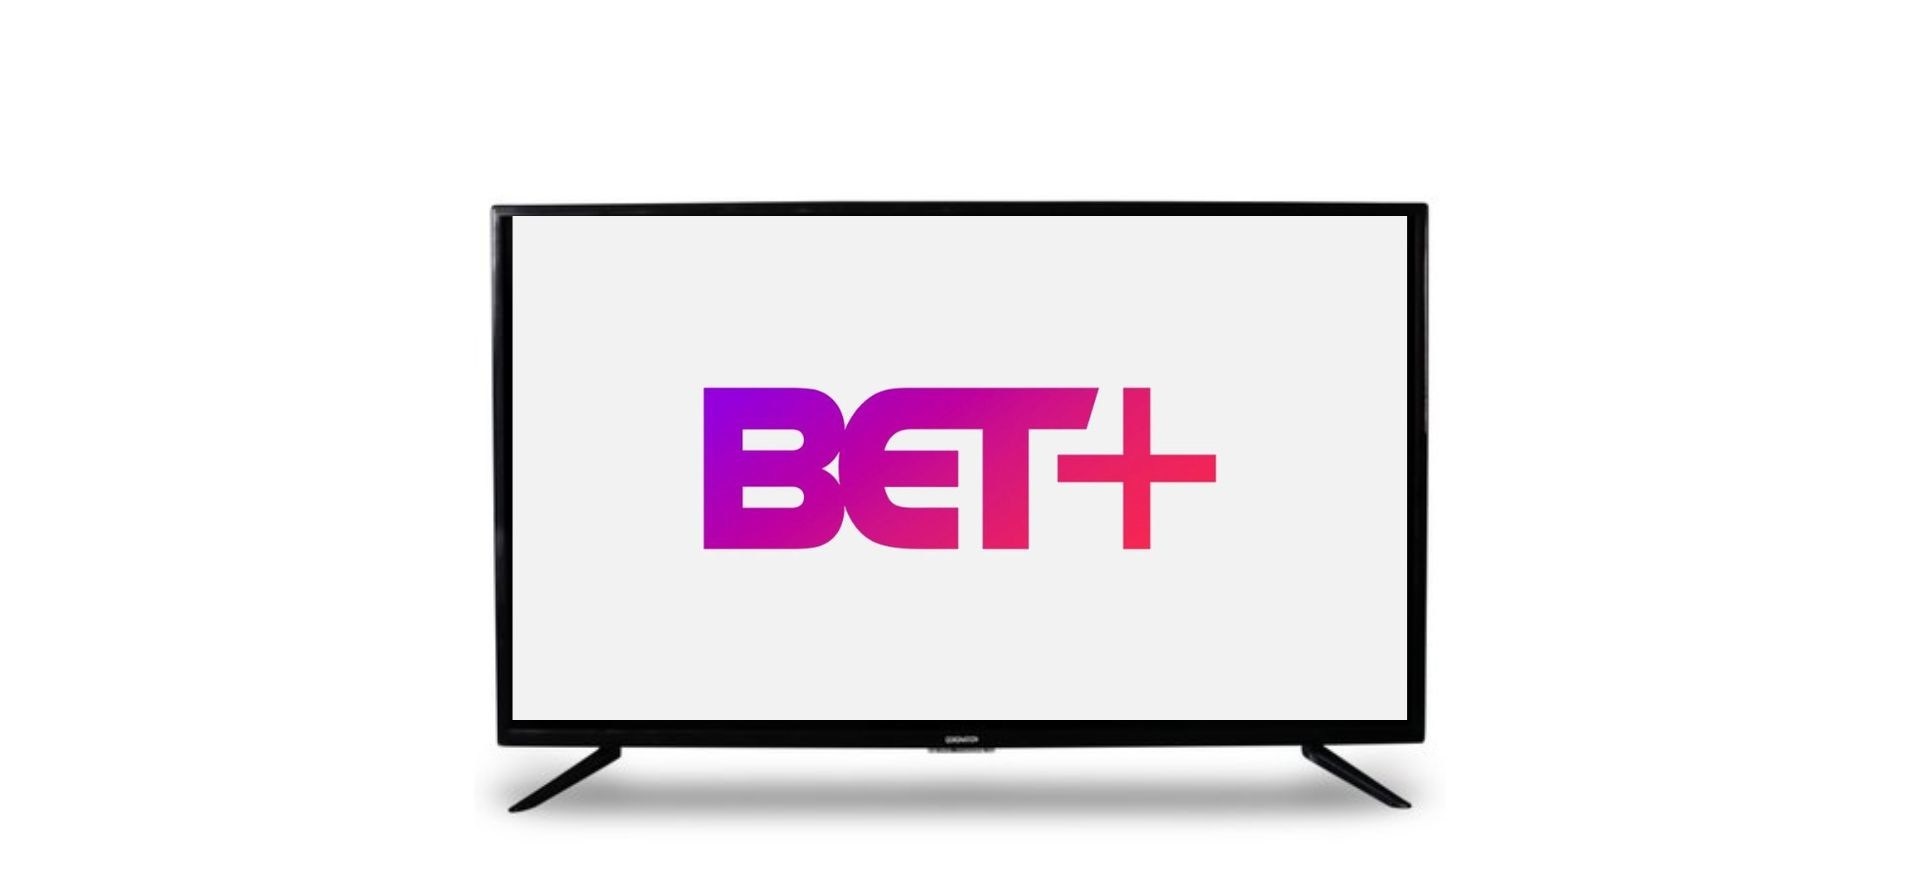 How Do I Download Bet Plus On My LG Smart TV